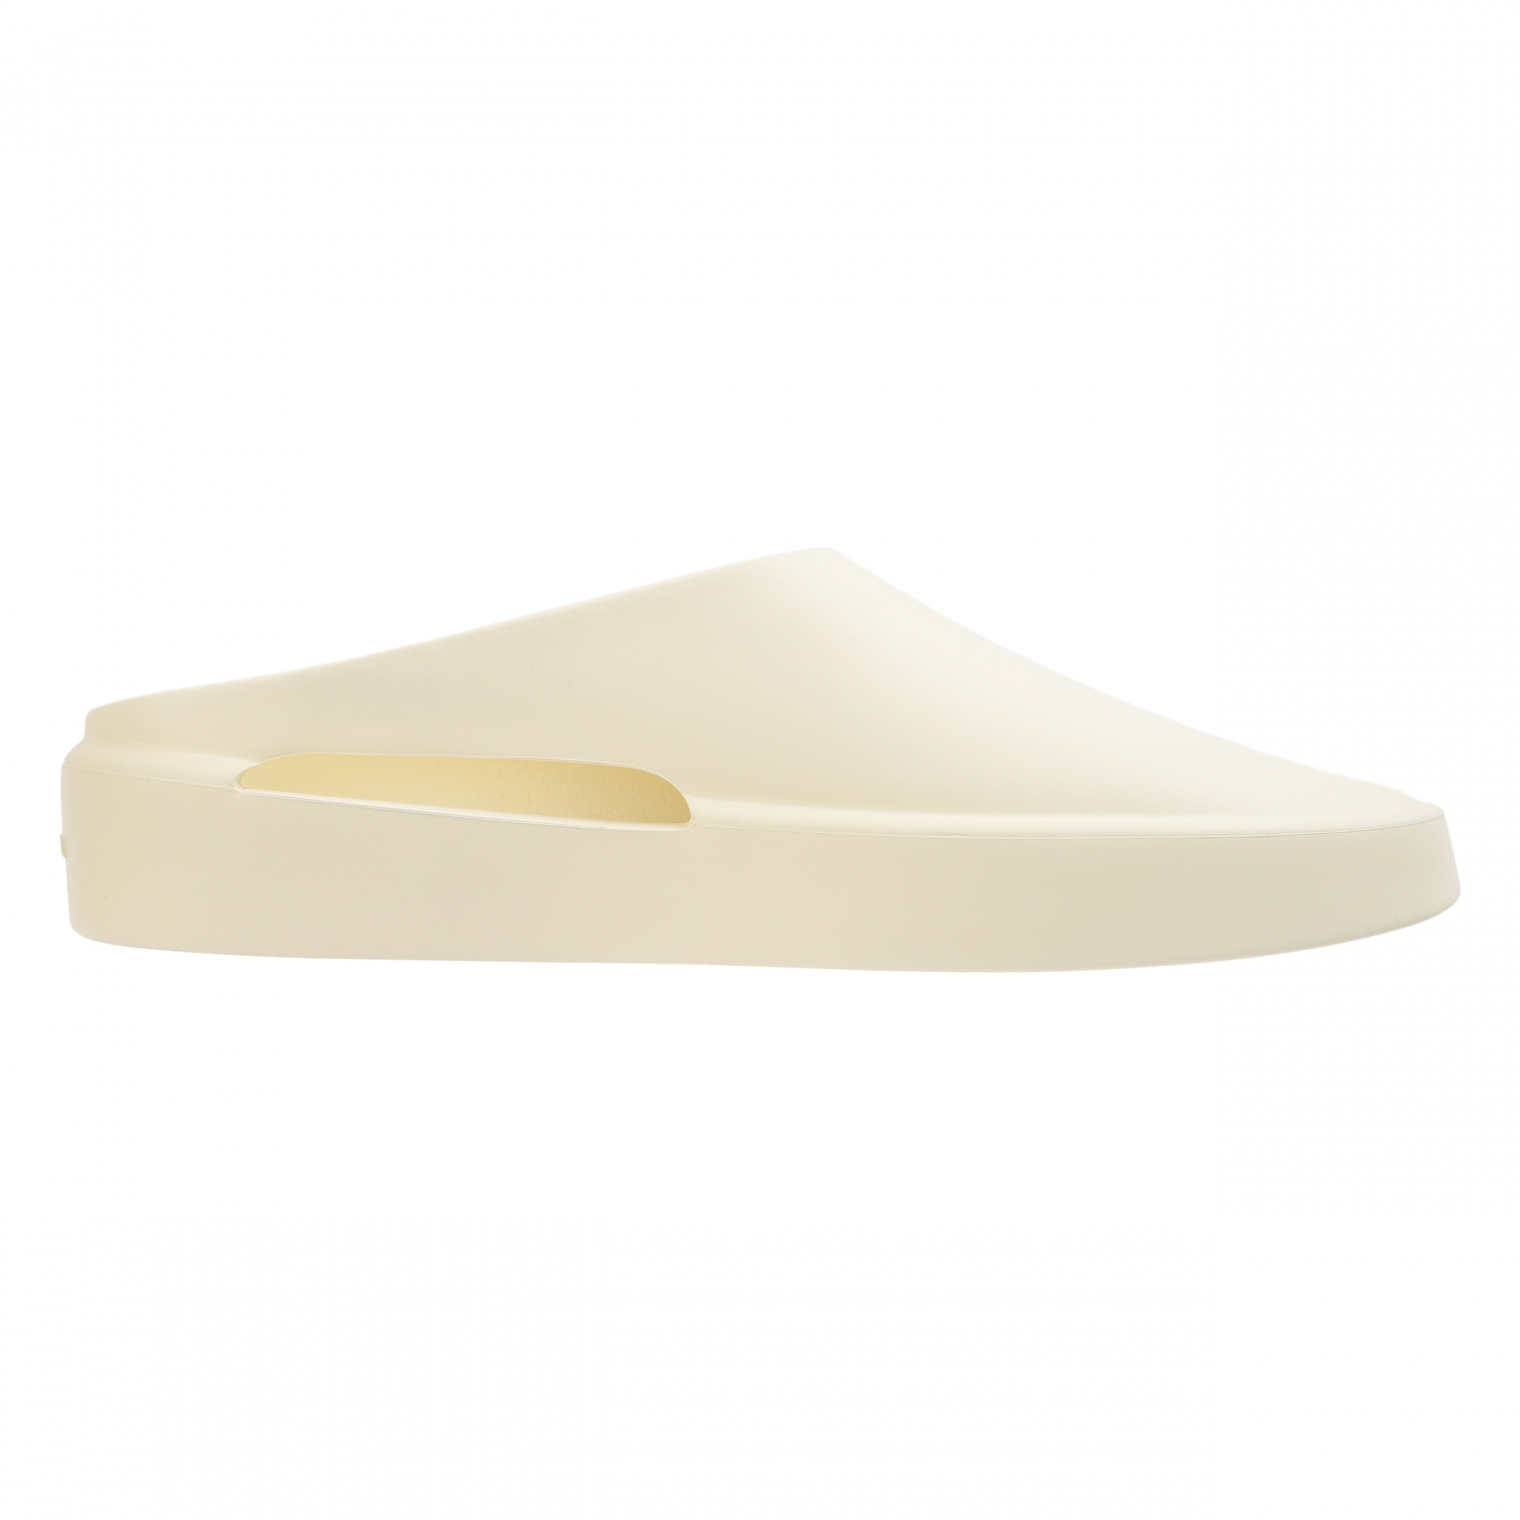 Fear of God Essentials The California slip-on shoes in cream